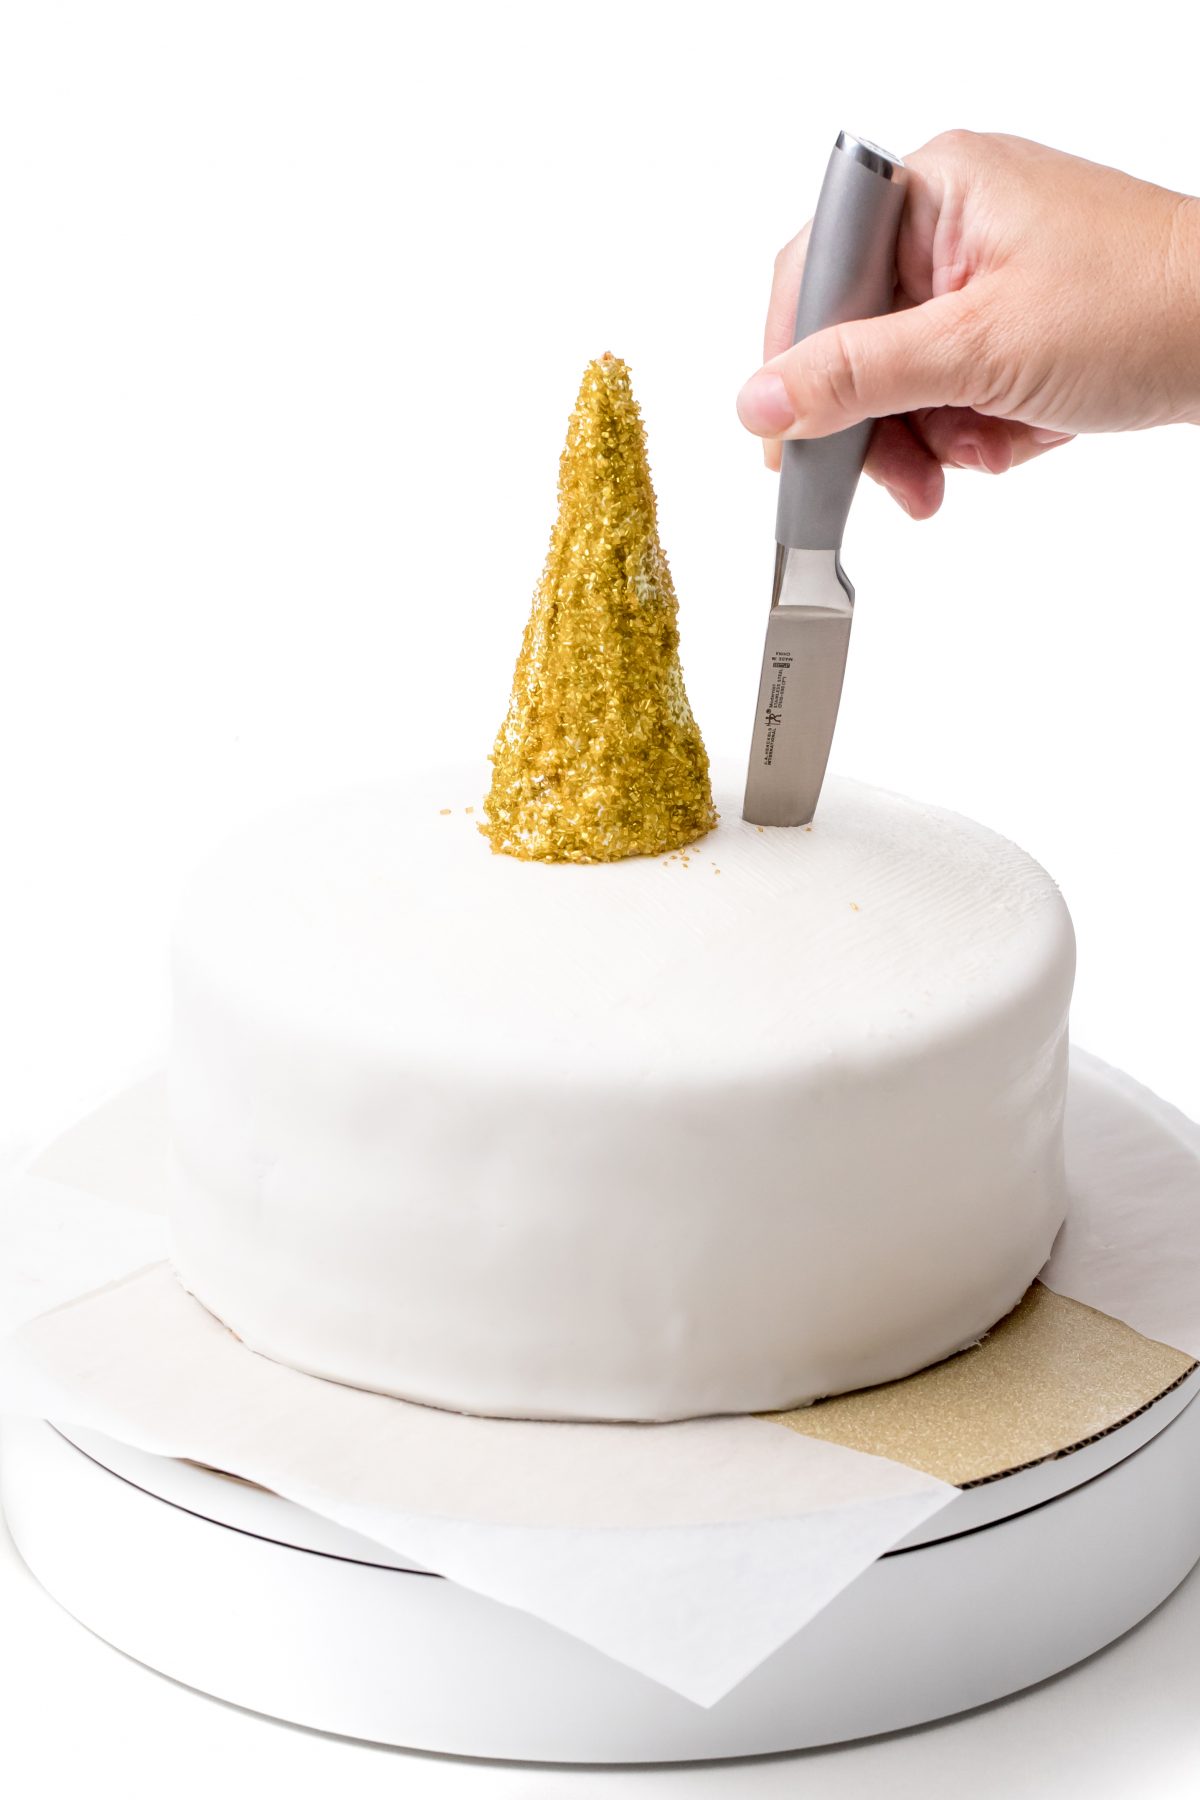 Place horn on cake and cut slits for ears